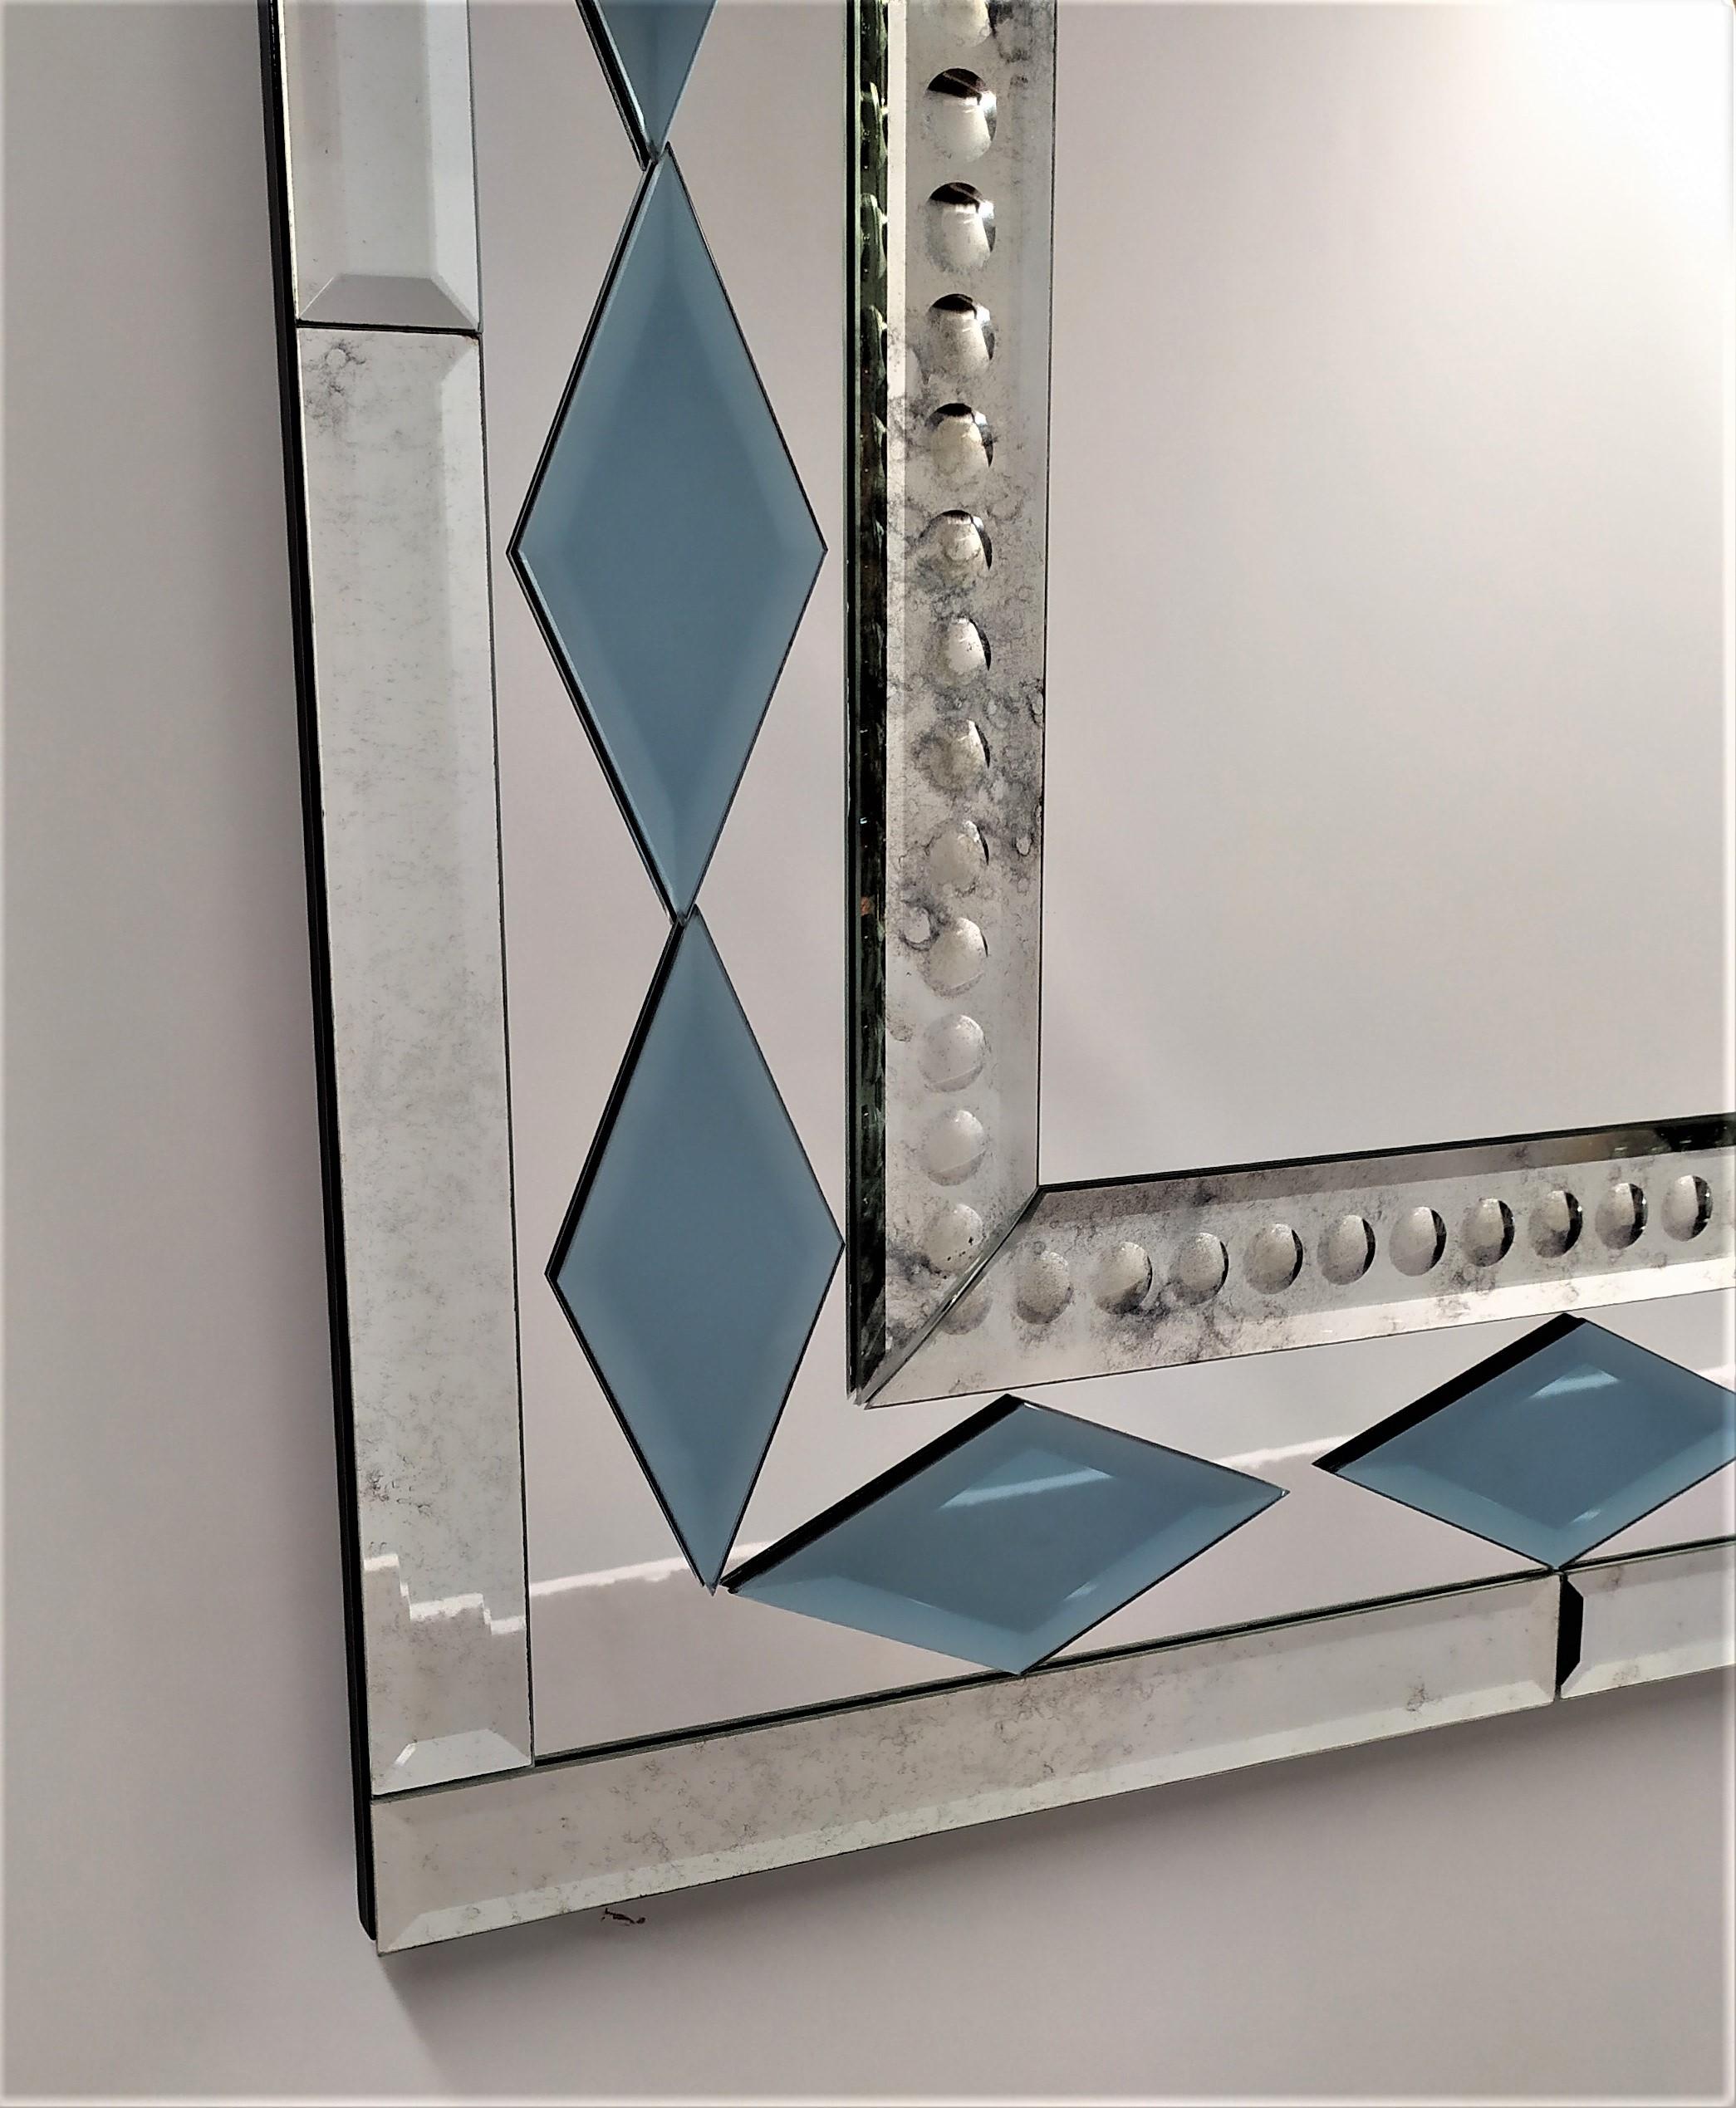 Rectangular murano glass mirror, from the twenty-first century, composed of beveled, antiqued and bubbles engraved bands by hand, with the insert of the blue crystal rhombuses faceted like diamonds all handmade, produced in a limited mirror made by